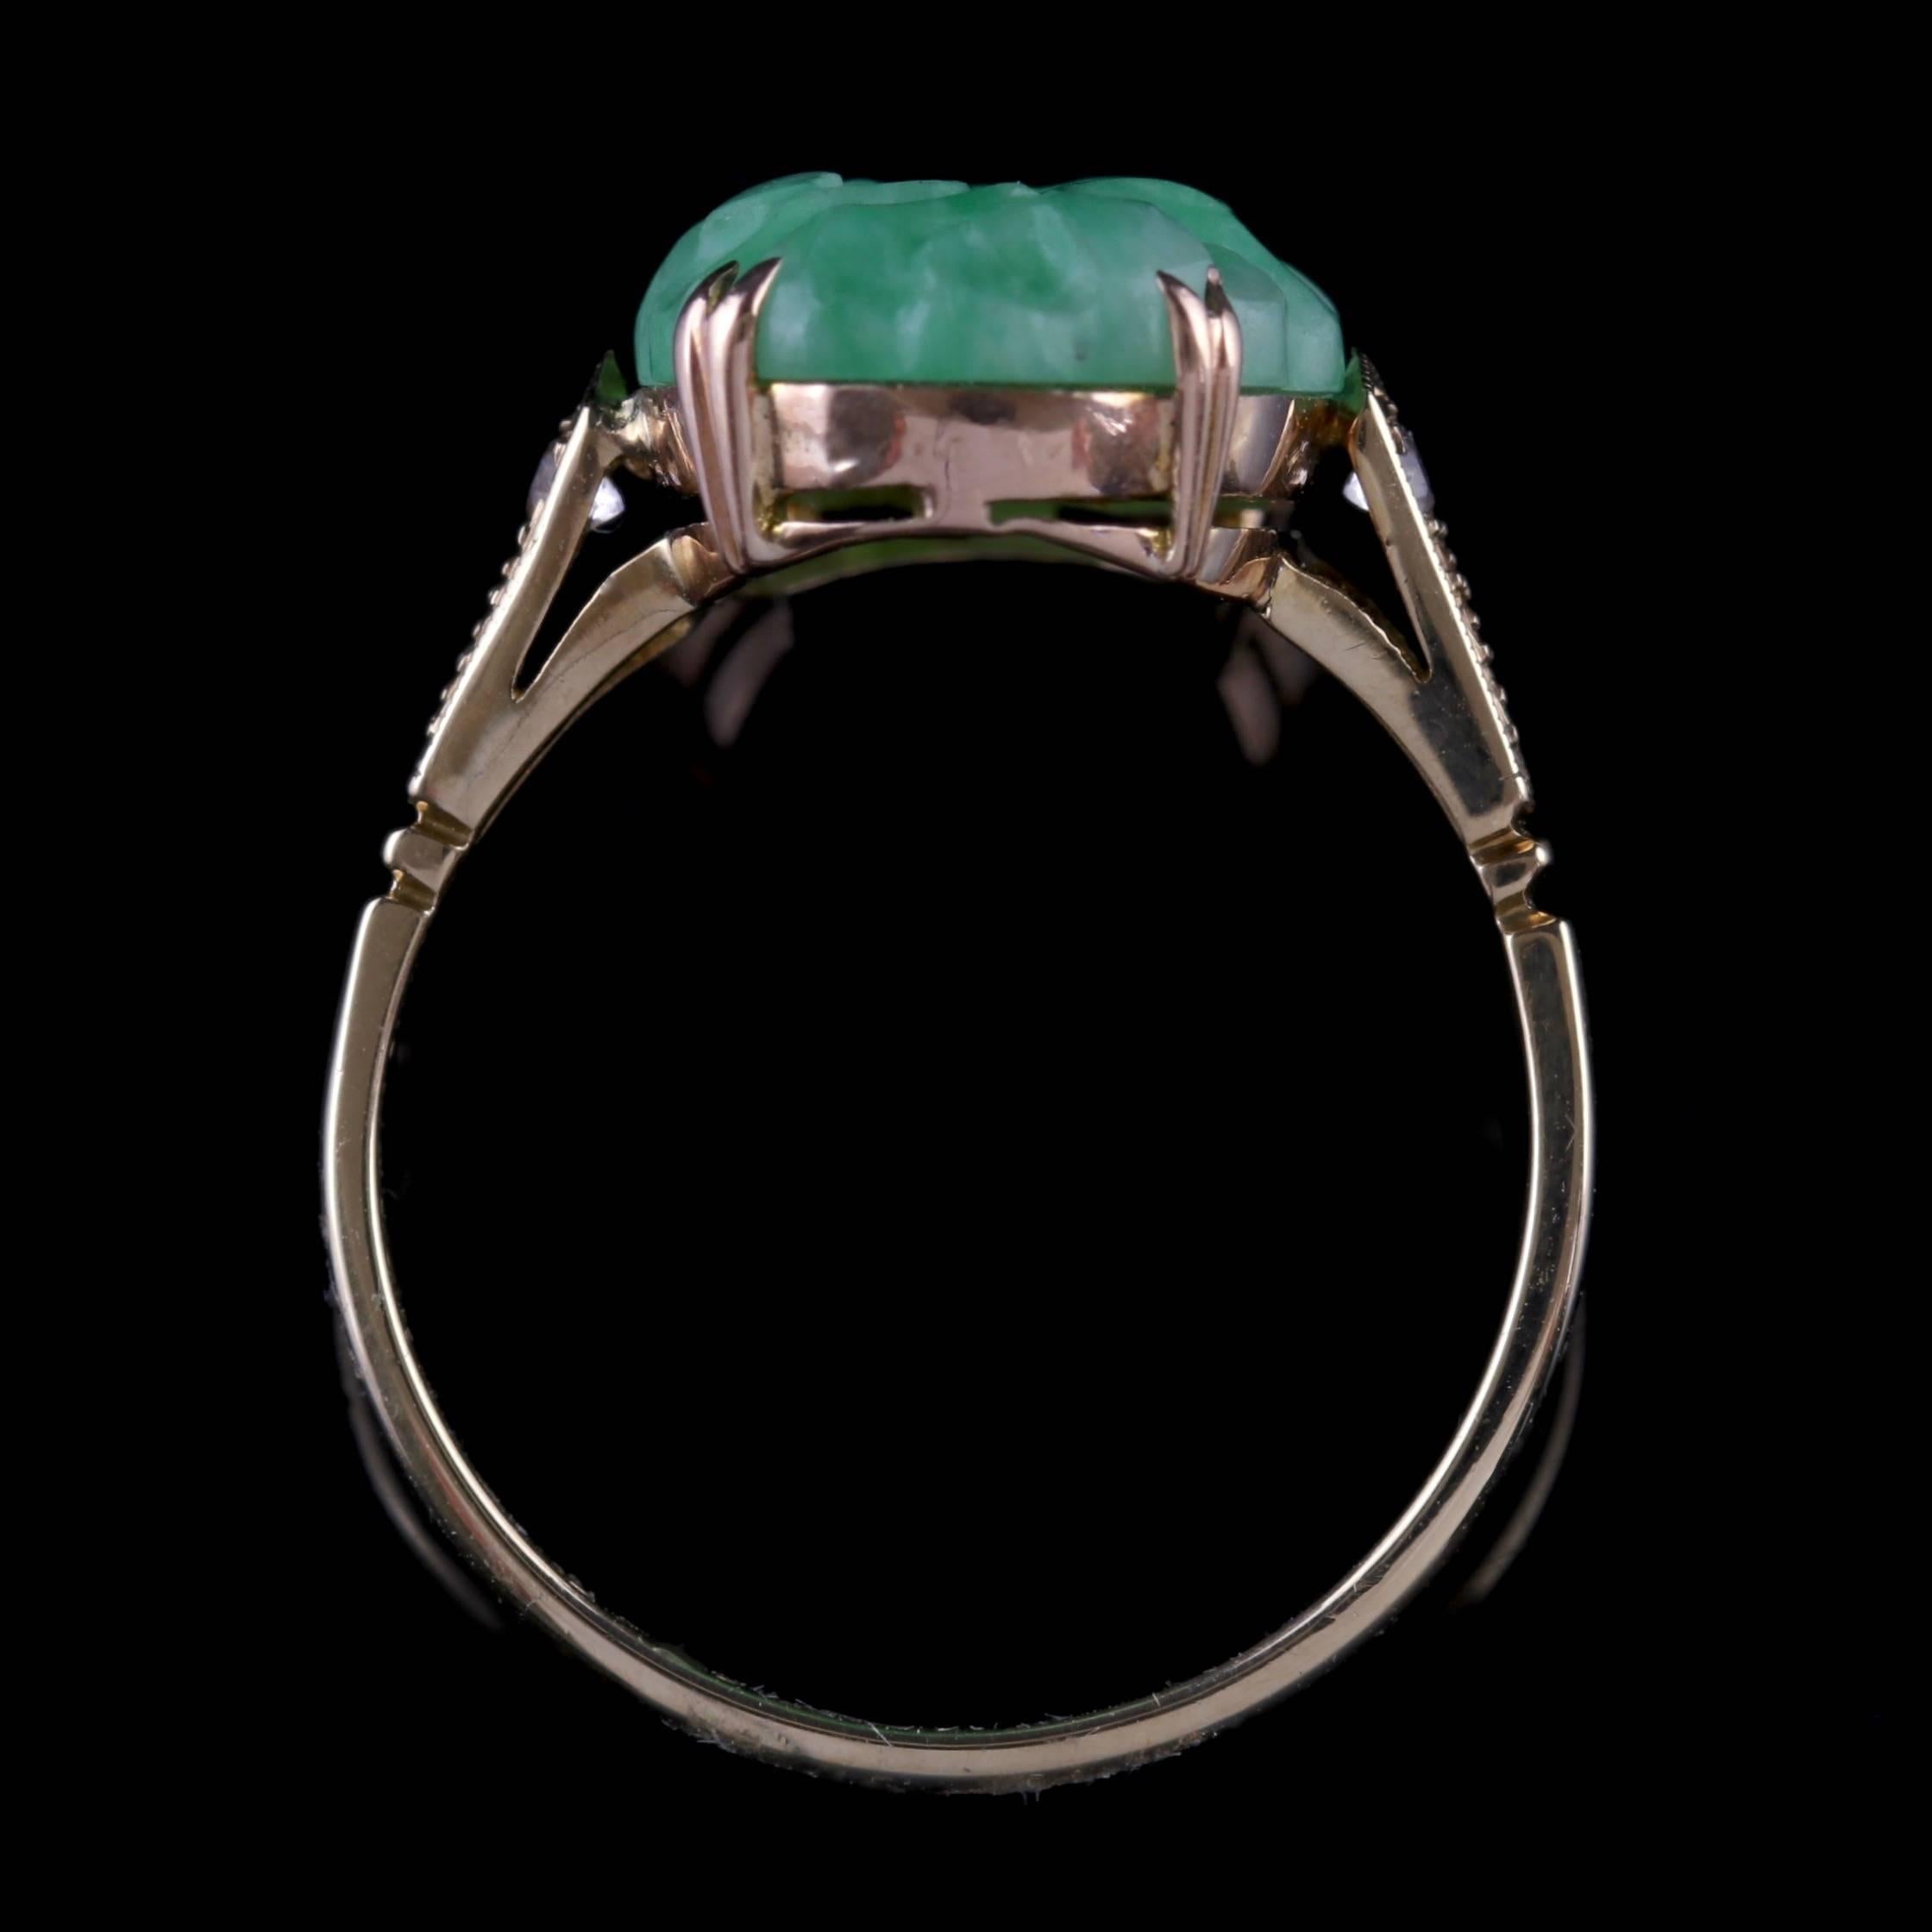 Antique Victorian Jade Ring Spinel 9 Carat Gold, circa 1900 For Sale 3